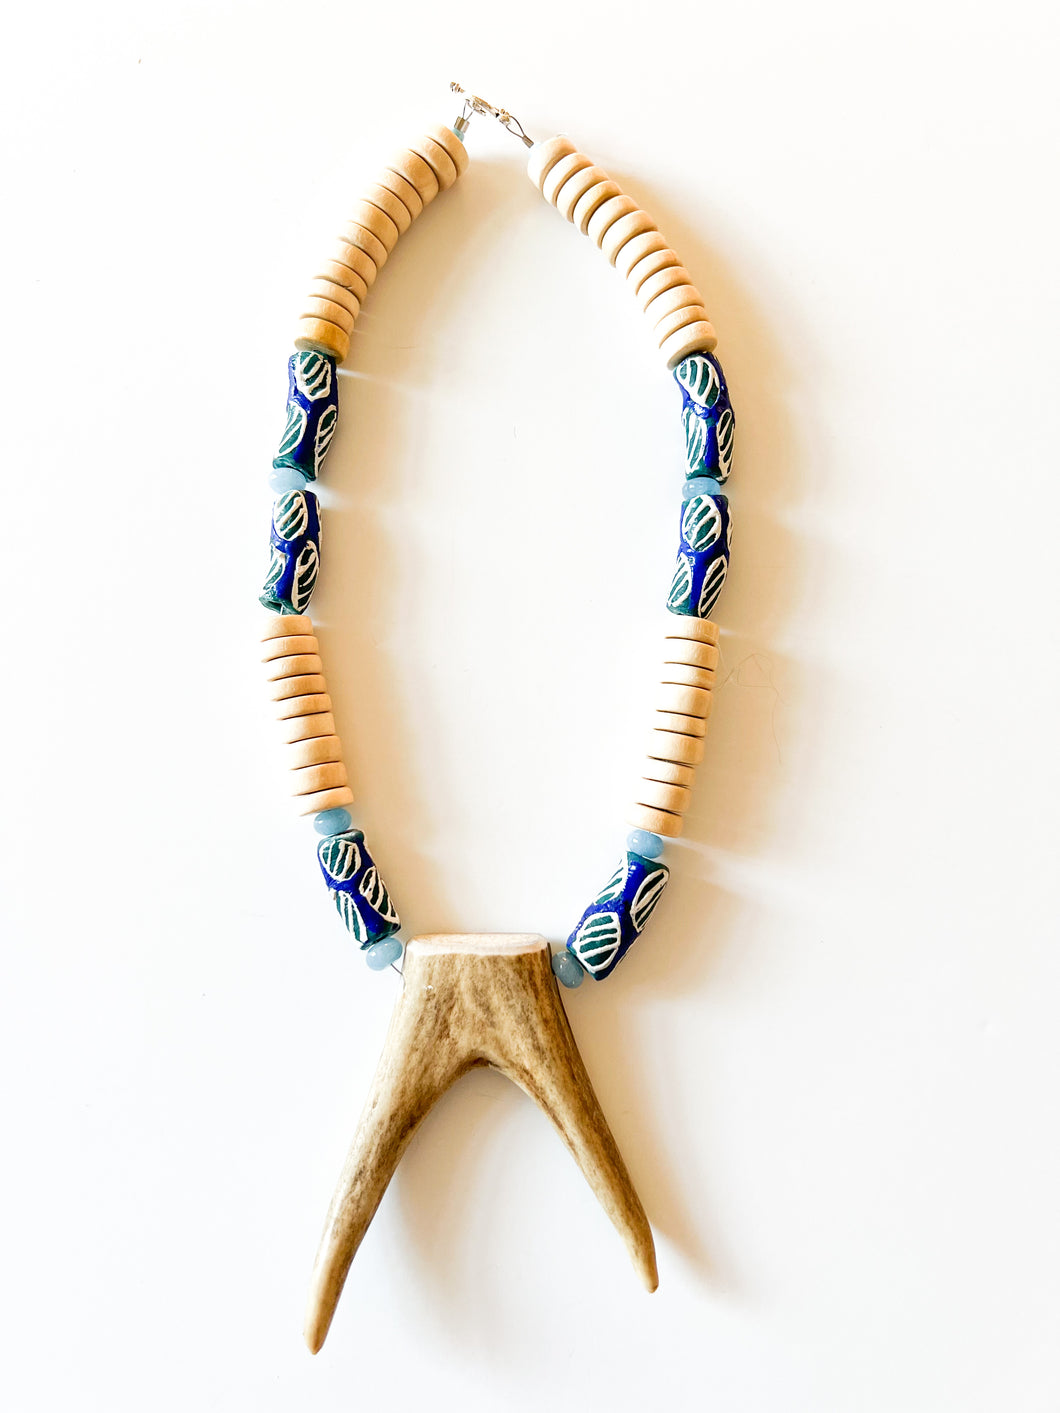 Mix of Blues and Natural Wood Antler Tip Necklace